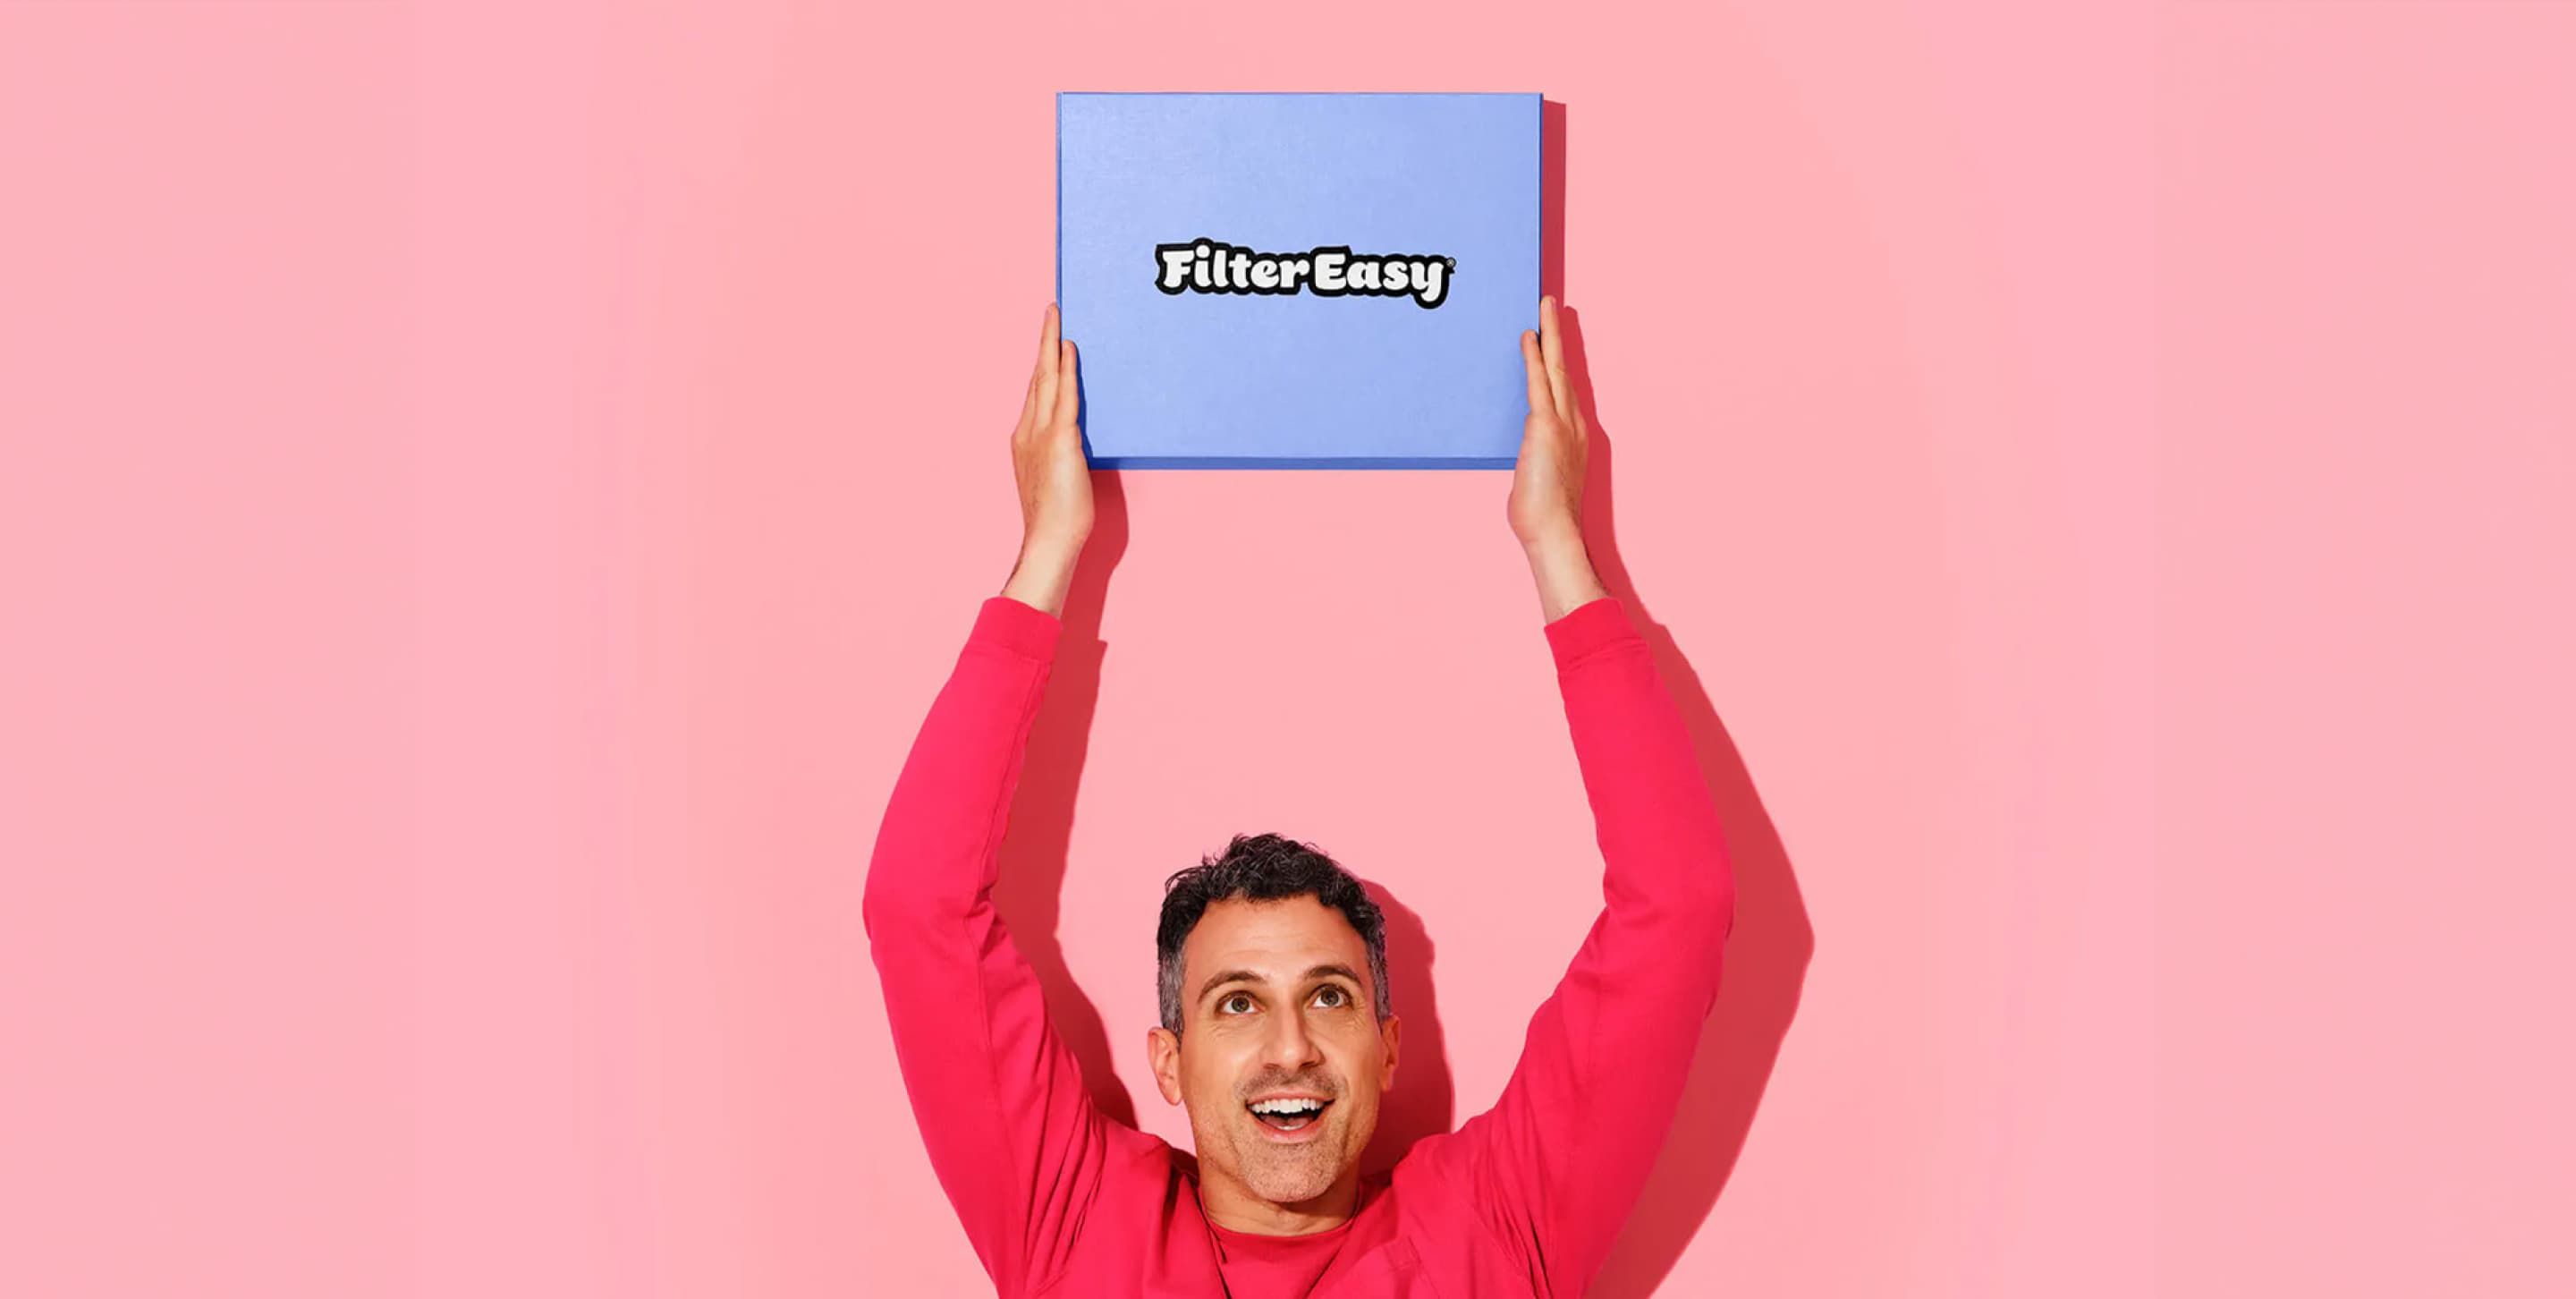 A man in a red long-sleeved shirt is smiling while holding a FilterEasy subscription box above his head.